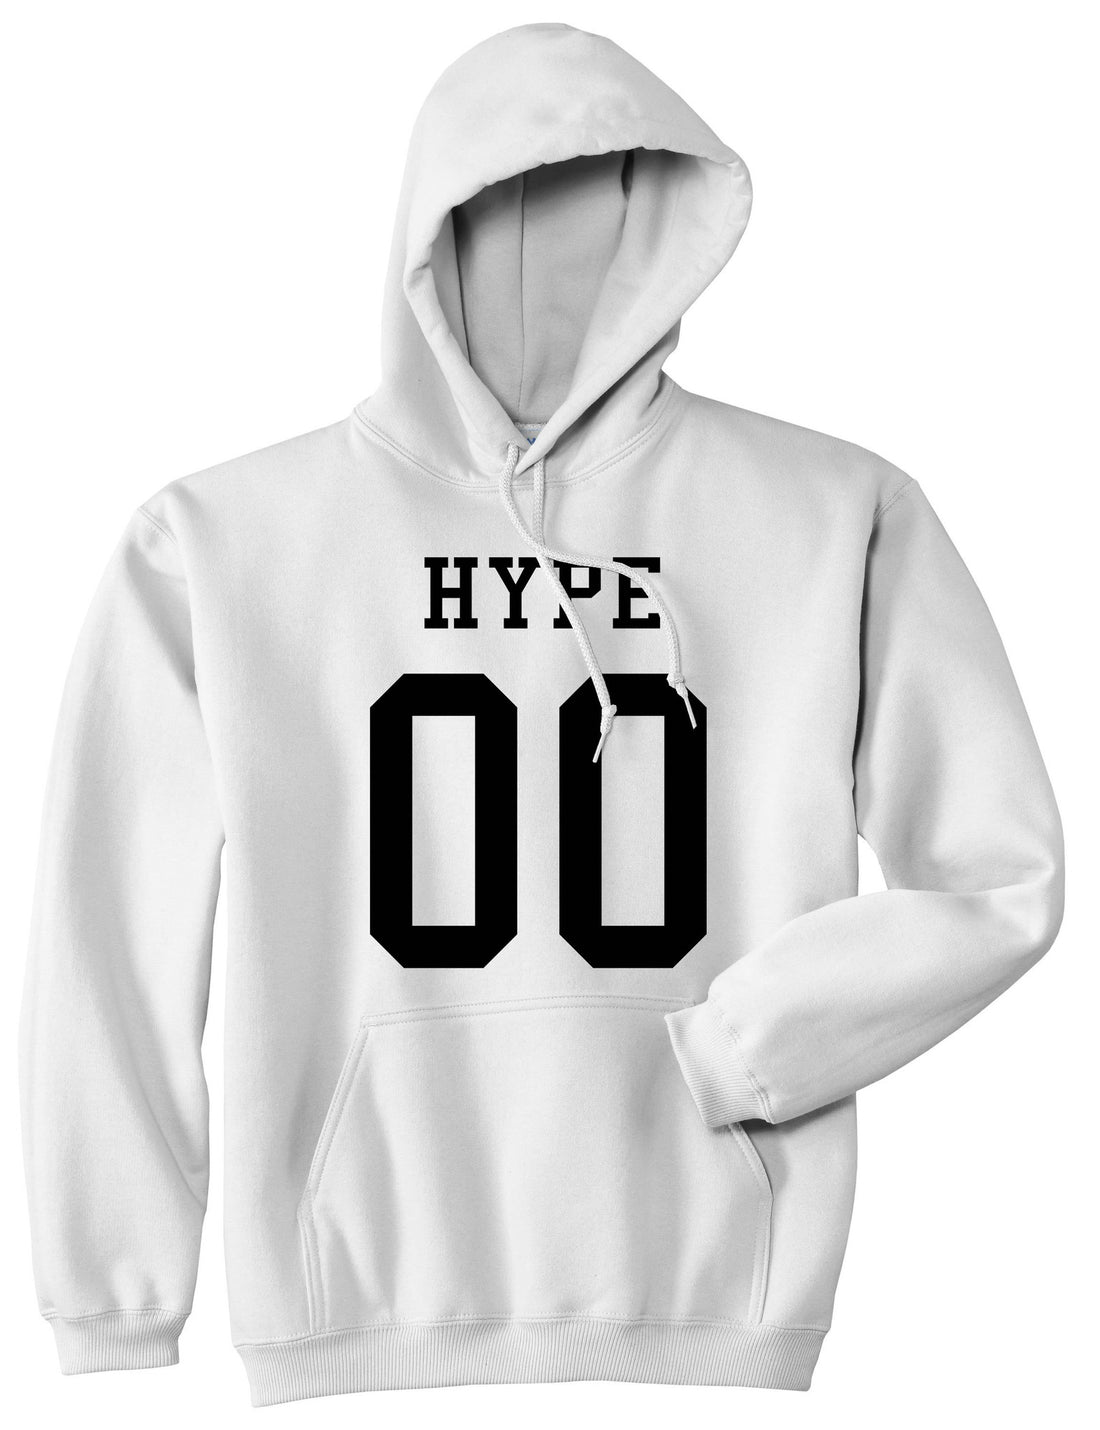 Hype Team Jersey Boys Kids Pullover Hoodie Hoody in White By Kings Of NY